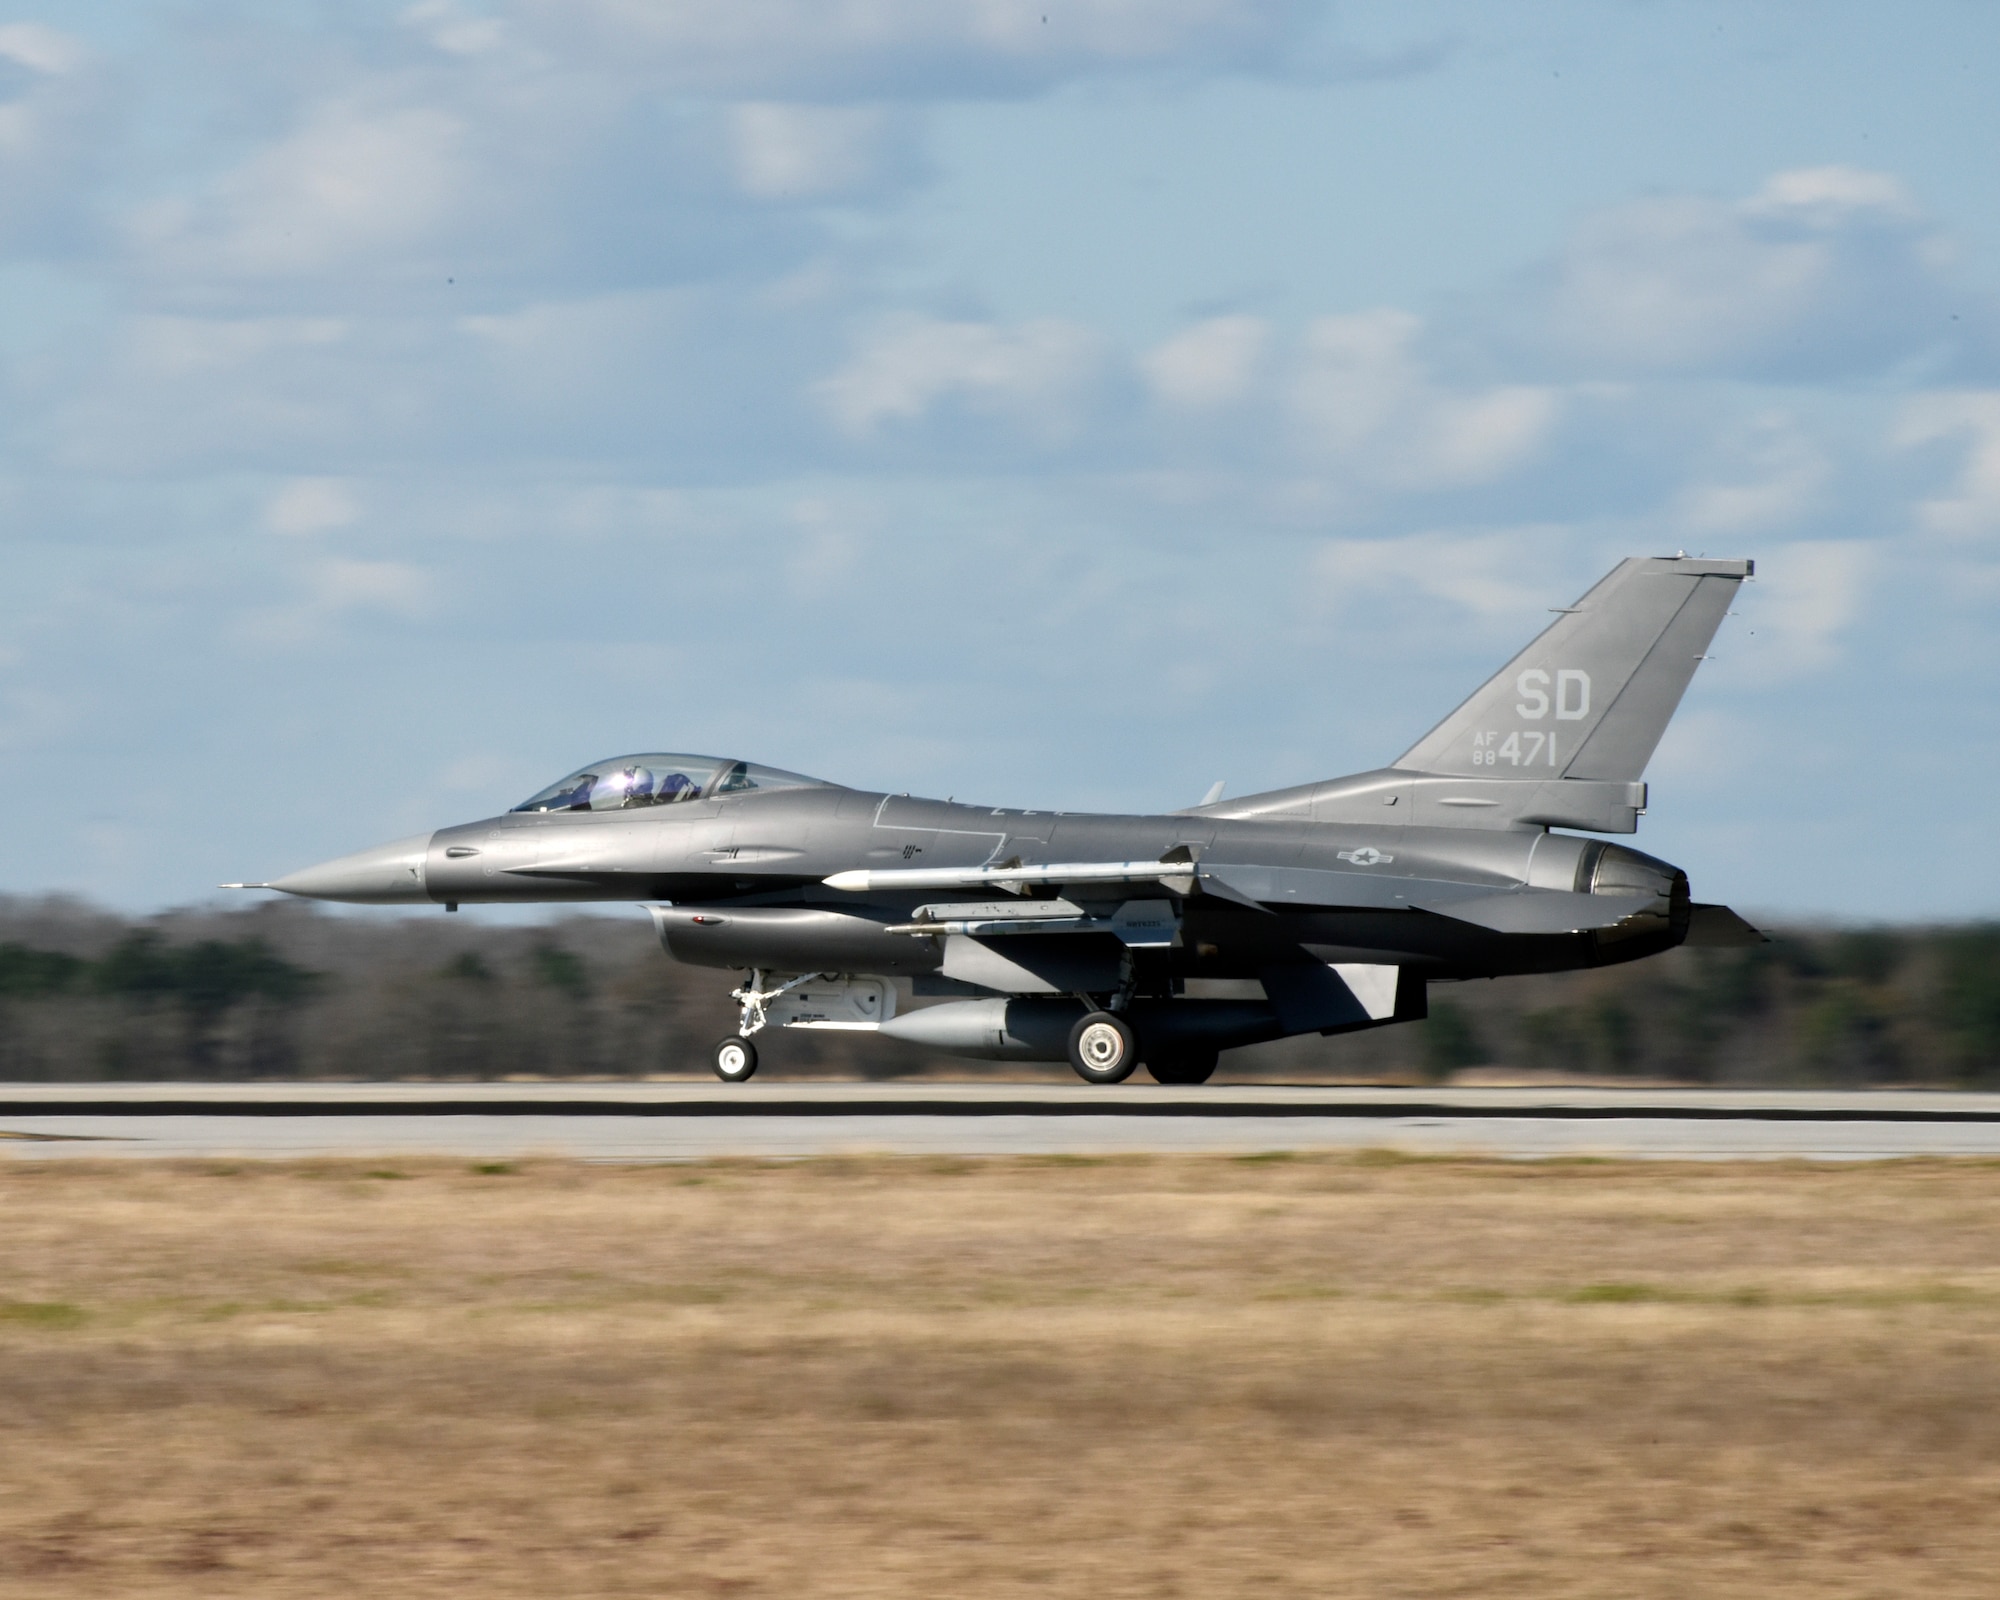 SAVANNAH CRTC, GA - An F-16 from the 114th Fighter Wing, South Dakota Air National Guard launches from the runway at the Savannah CRTC during the Sentry Savannah exercise Feb. 1, 2016.  The unit, along with other units of the Active Air Force and Air National Guard spent two weeks at the CRTC training together. (U.S. Air National Guard photo by Senior Master Sgt. Nancy Ausland/Released)